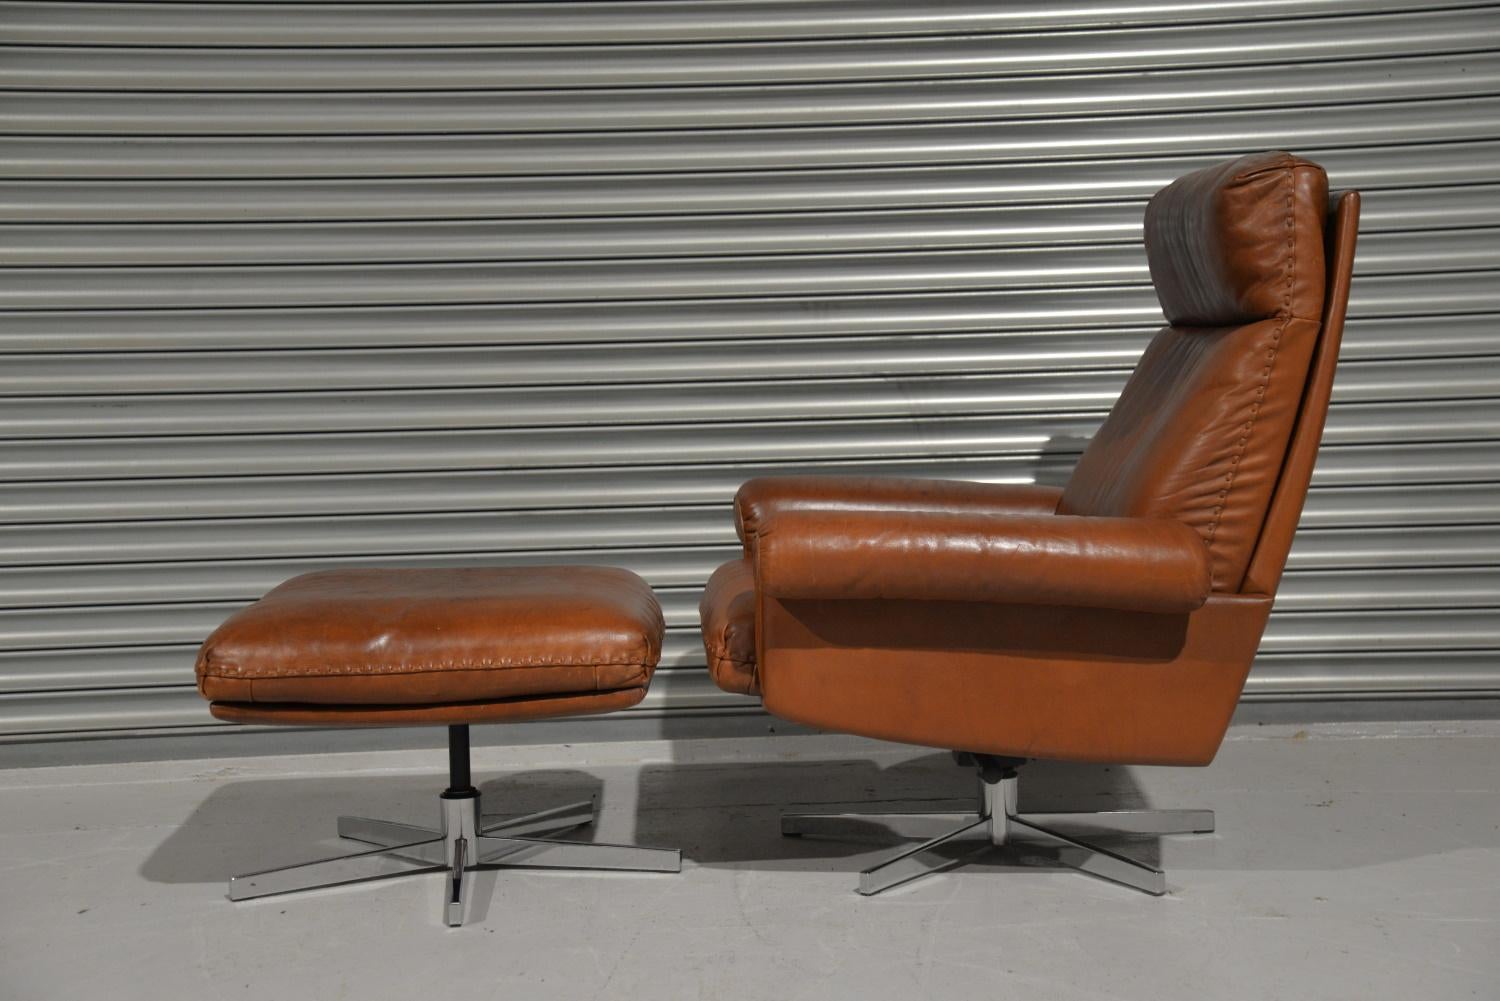 We are delighted to bring to you a highly desirable and rarely available vintage 1970s De Sede DS 31 high back swivel reclining leather armchair with ottoman. Hand built in the 1970s by De Sede craftsman in Switzerland. The swivel leather armchair